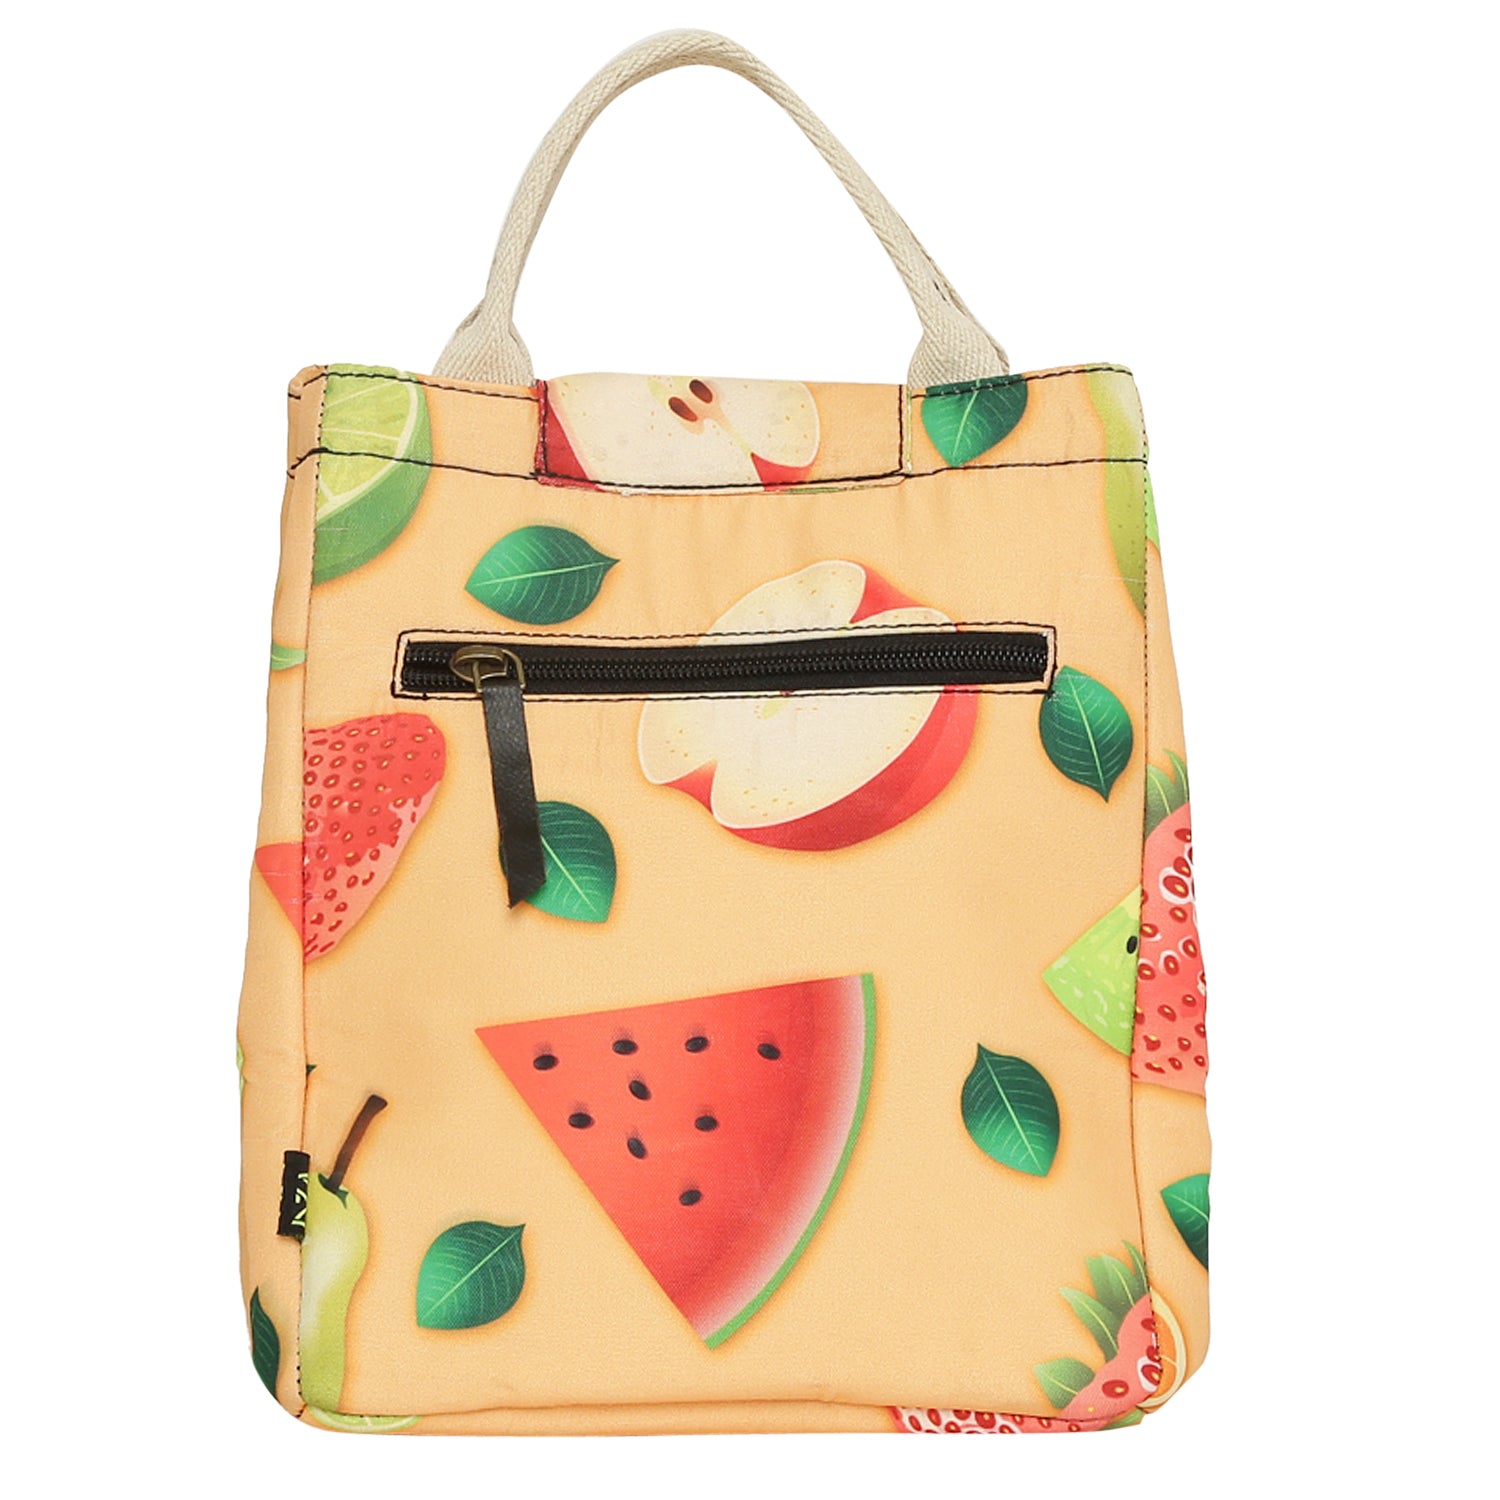 Tiffin- Lunch  Bag- Fruits Charm